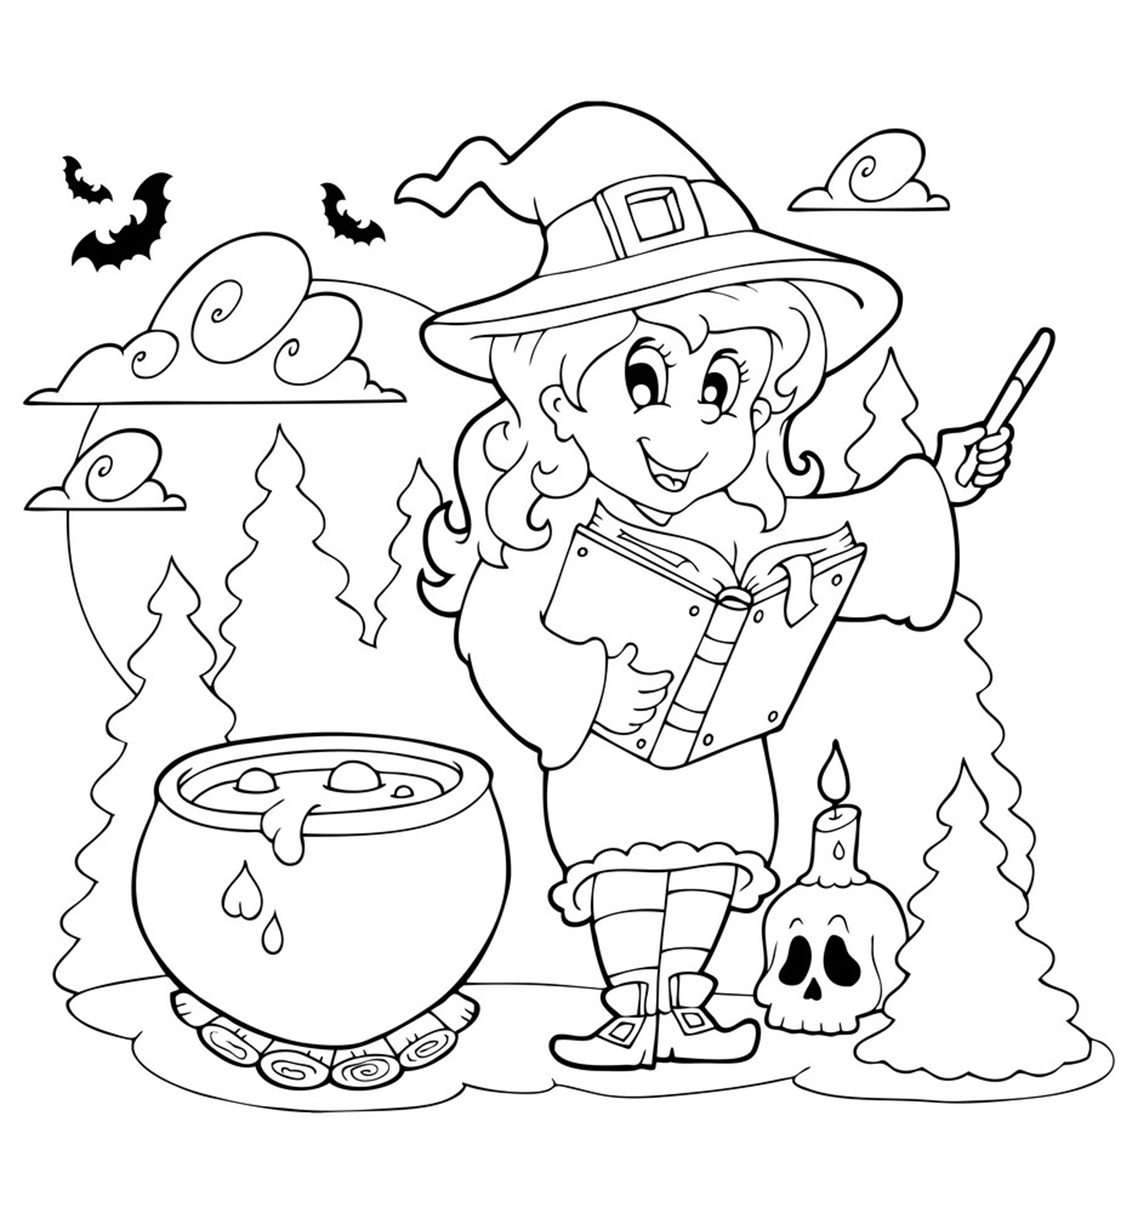 halloween coloring pages to color online free halloween coloring pages for kids or for the kid in color coloring pages to halloween online 